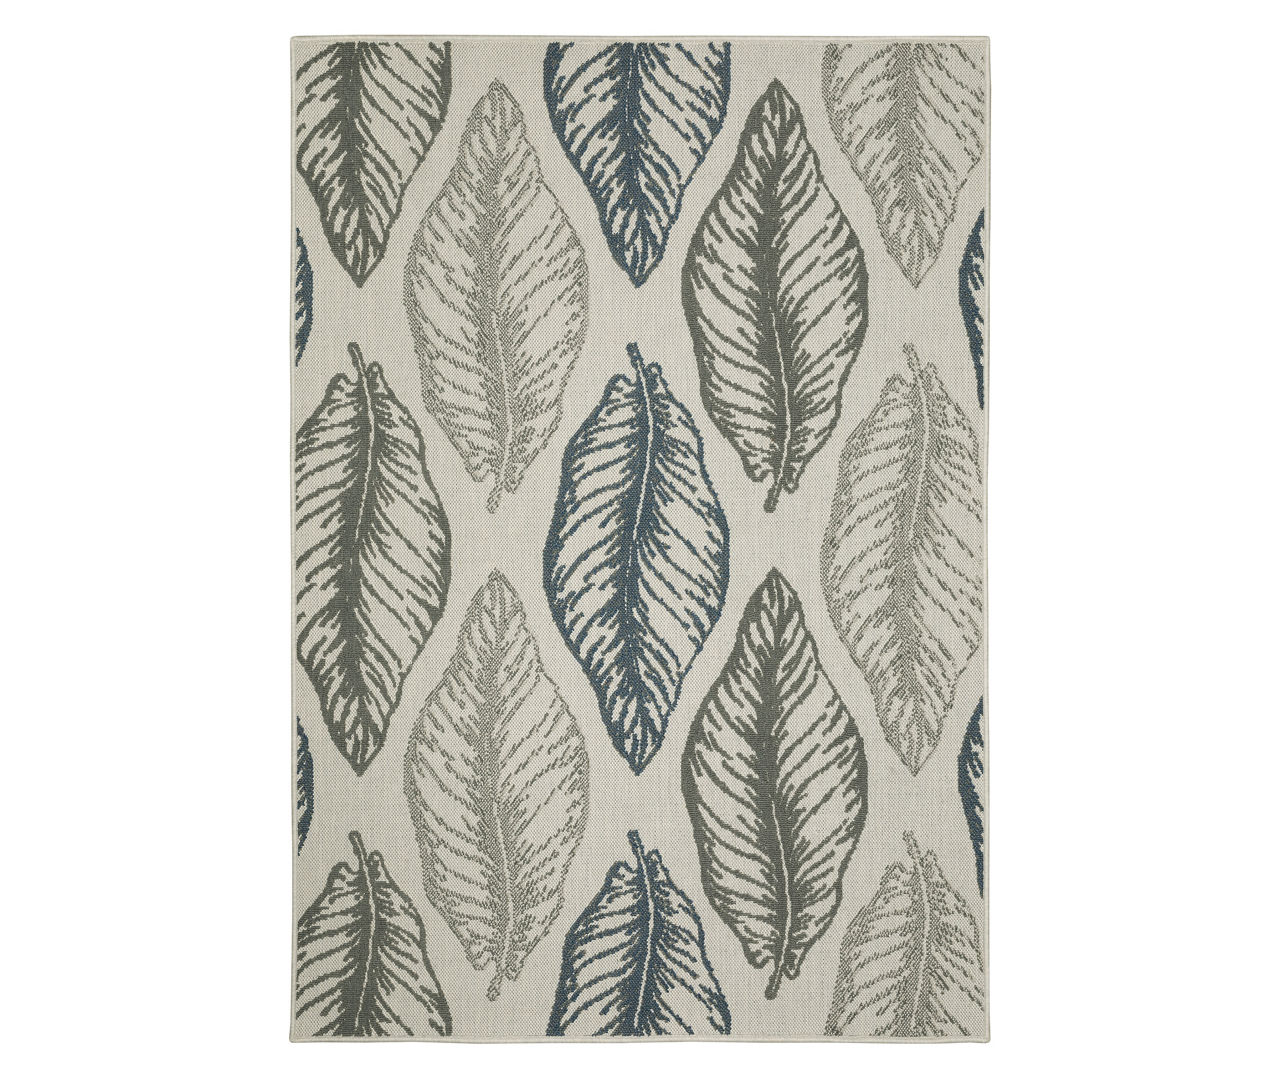 Torian Beige, Green & Blue Leaves Outdoor Area Rug, (1.1' x 7.3')